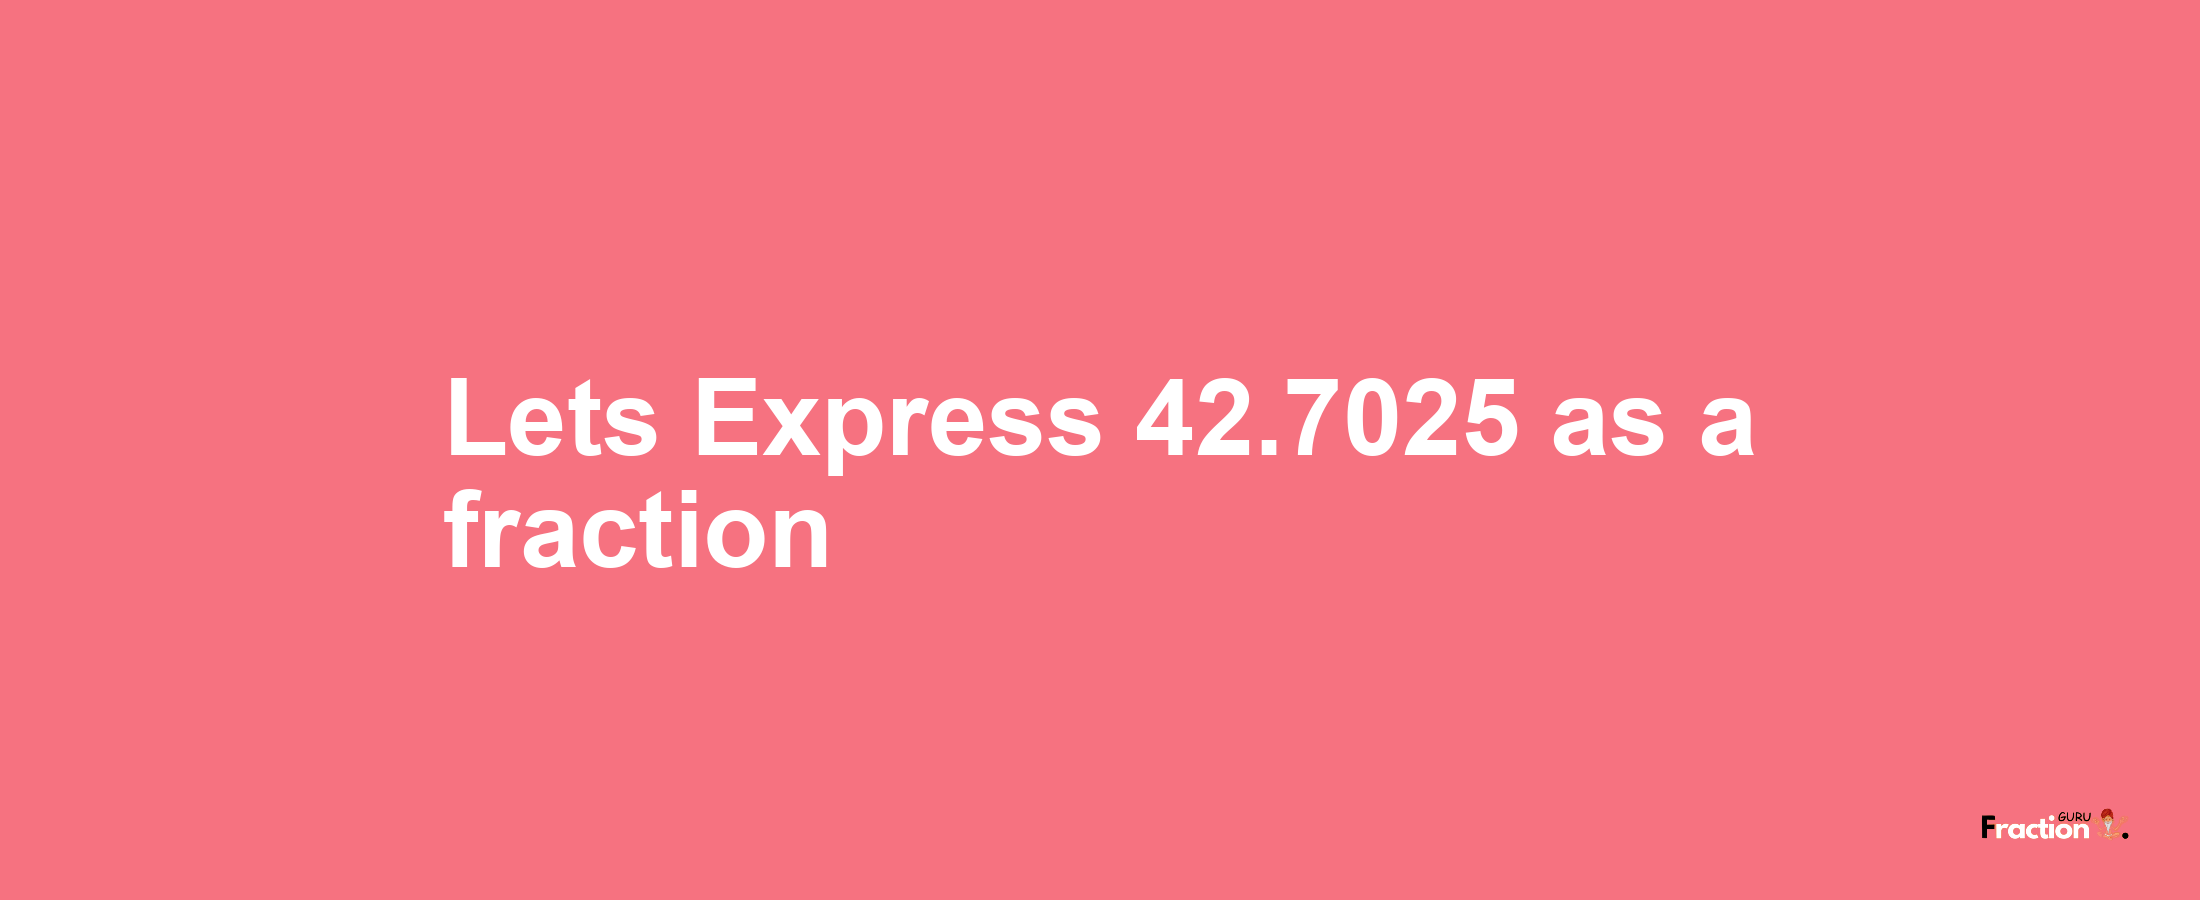 Lets Express 42.7025 as afraction